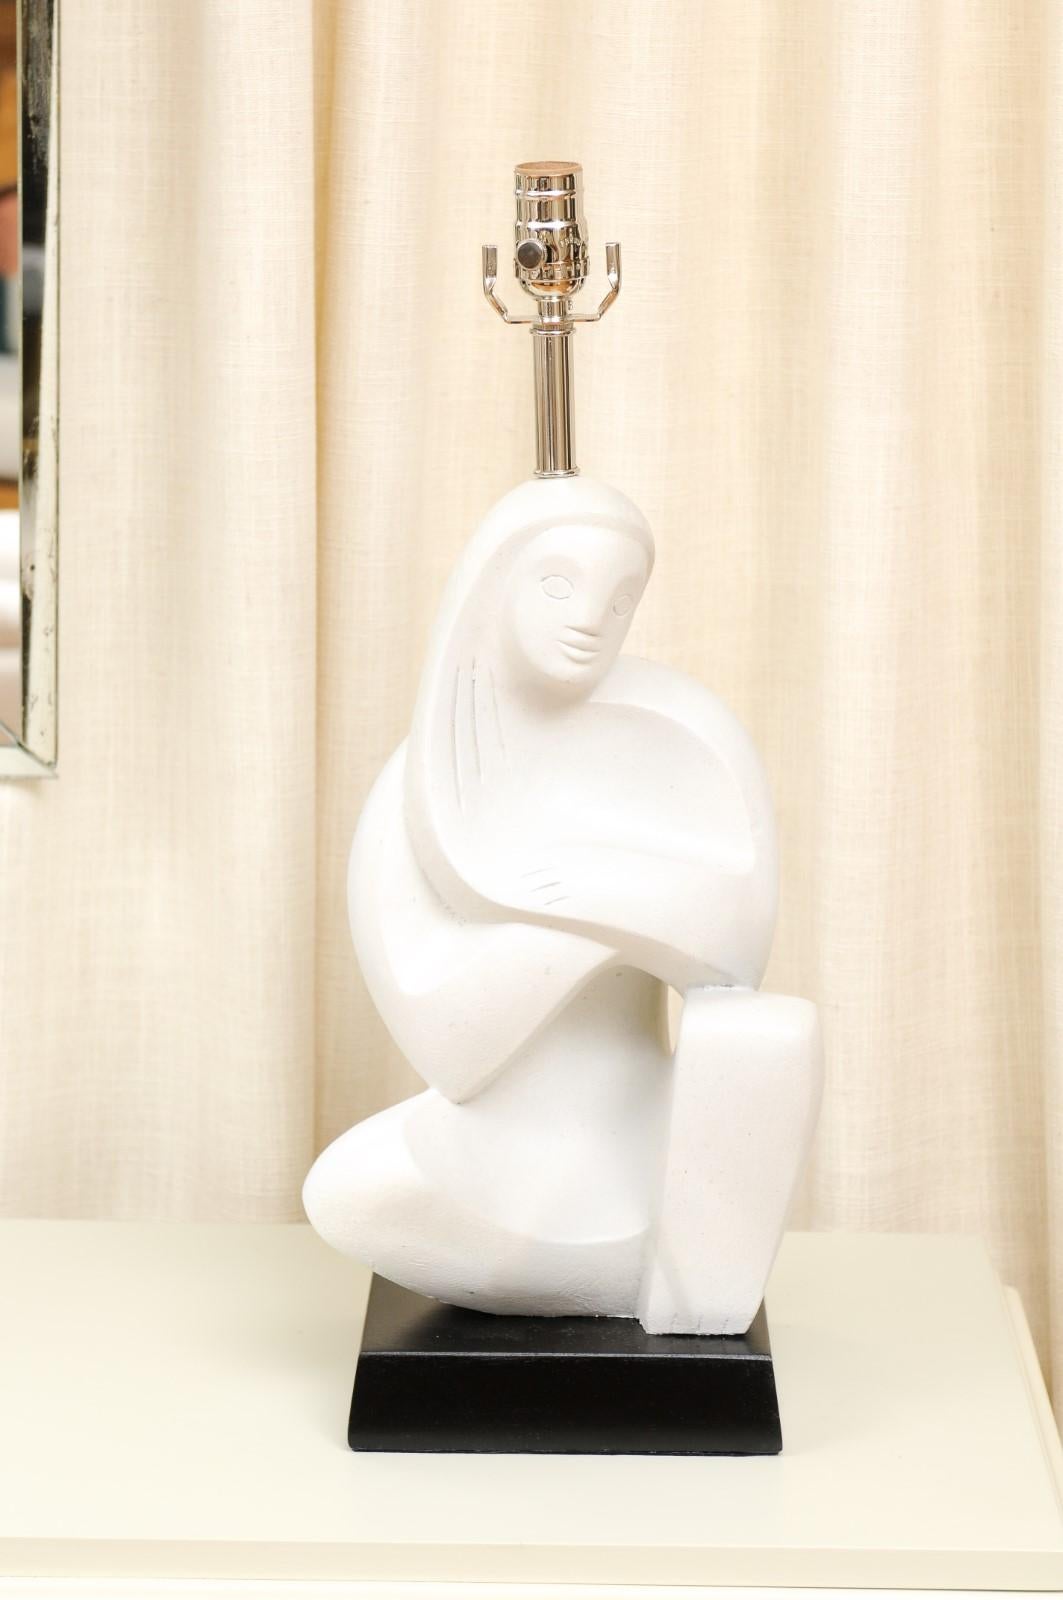 Remarkable Restored Pair of Plaster Cubist Figures by RIMA, New York, circa 1940 For Sale 8